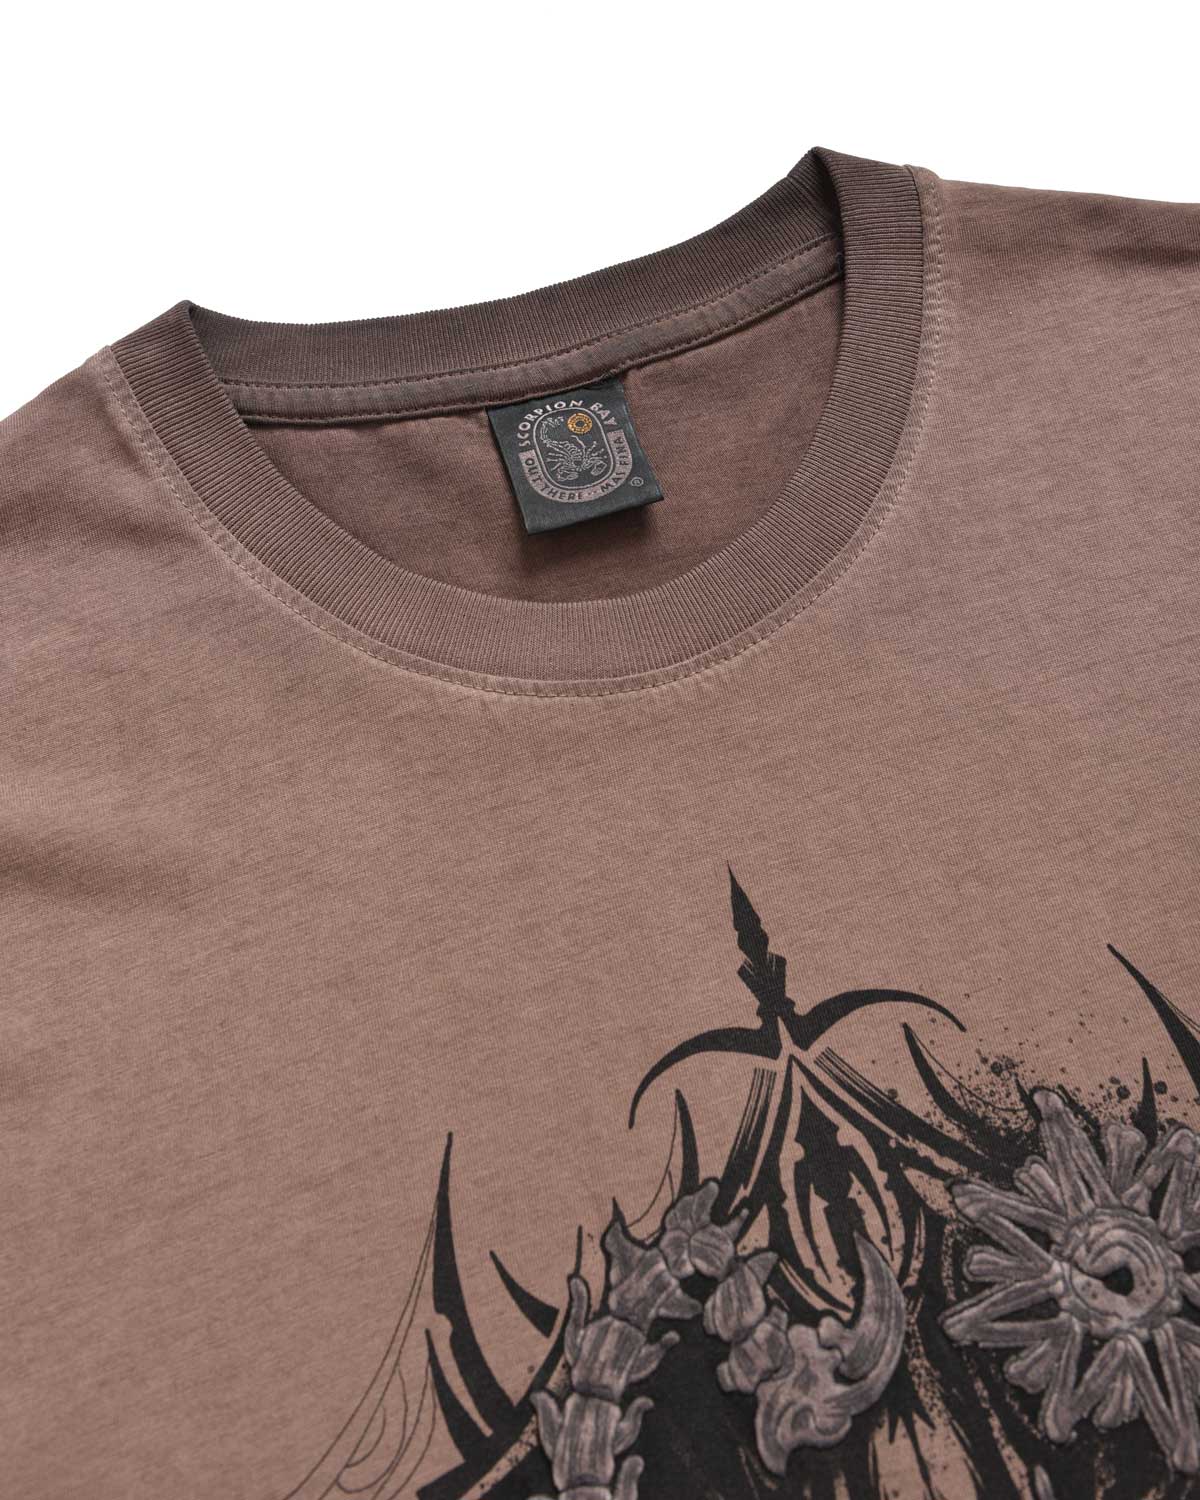 Man | Tobacco Color "Tribal Scorpion" T-Shirt In 100% Cotton